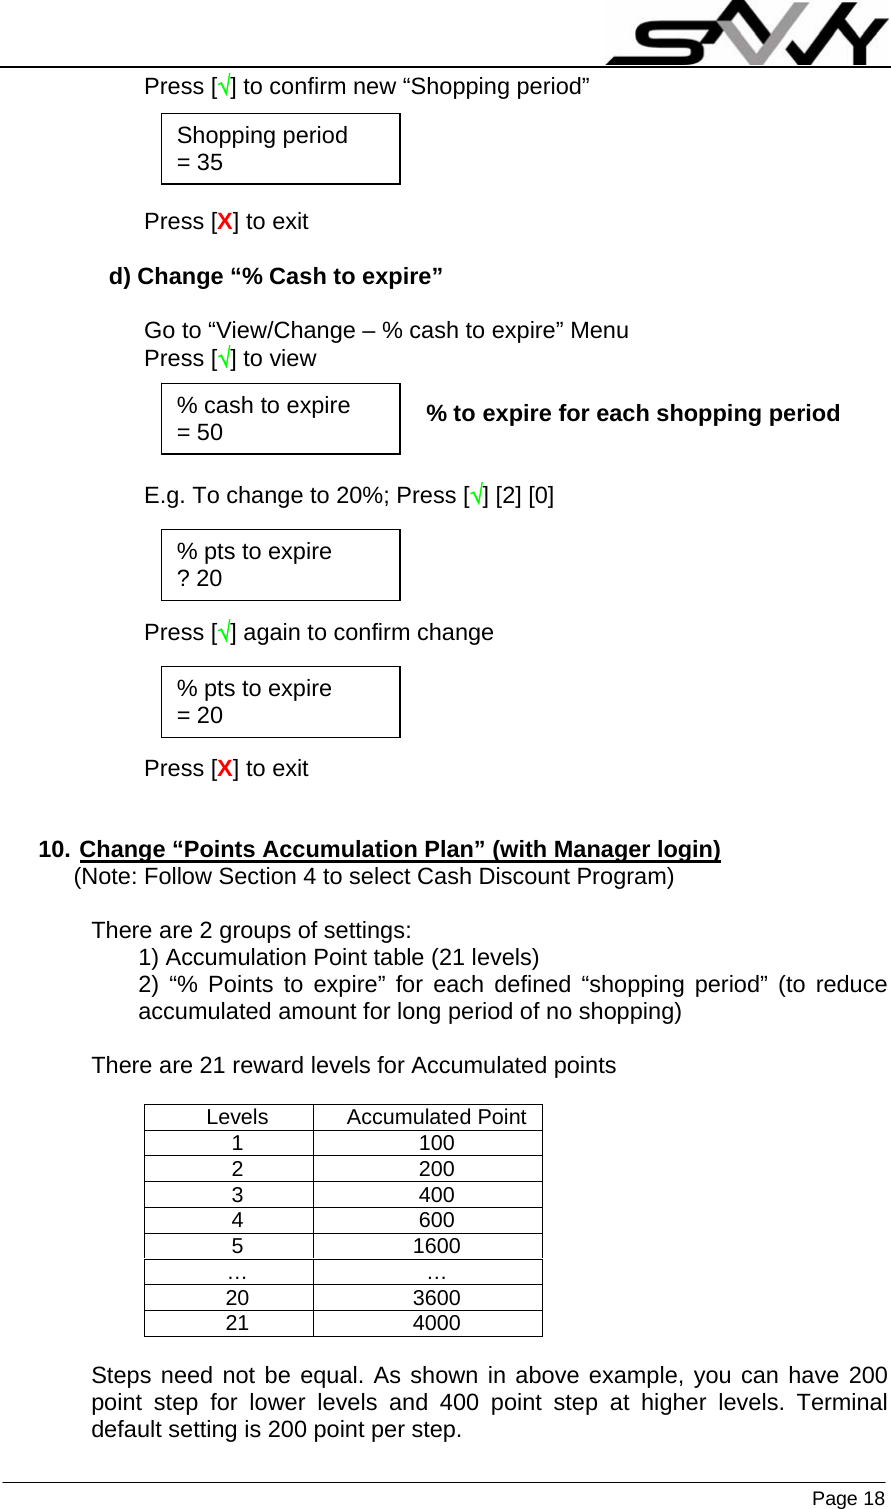                    Page 18  Press [√] to confirm new “Shopping period”     Press [X] to exit  d) Change “% Cash to expire”  Go to “View/Change – % cash to expire” Menu Press [√] to view  % to expire for each shopping period   E.g. To change to 20%; Press [√] [2] [0]     Press [√] again to confirm change     Press [X] to exit   10. Change “Points Accumulation Plan” (with Manager login) (Note: Follow Section 4 to select Cash Discount Program)  There are 2 groups of settings: 1) Accumulation Point table (21 levels) 2) “% Points to expire” for each defined “shopping period” (to reduce accumulated amount for long period of no shopping)  There are 21 reward levels for Accumulated points    Steps need not be equal. As shown in above example, you can have 200 point step for lower levels and 400 point step at higher levels. Terminal default setting is 200 point per step. Levels Accumulated Point 1 100 2 200 3 400 4 600 5 1600 … … 20 3600 21 4000 % cash to expire = 50 % pts to expire ? 20 % pts to expire = 20 Shopping period = 35 